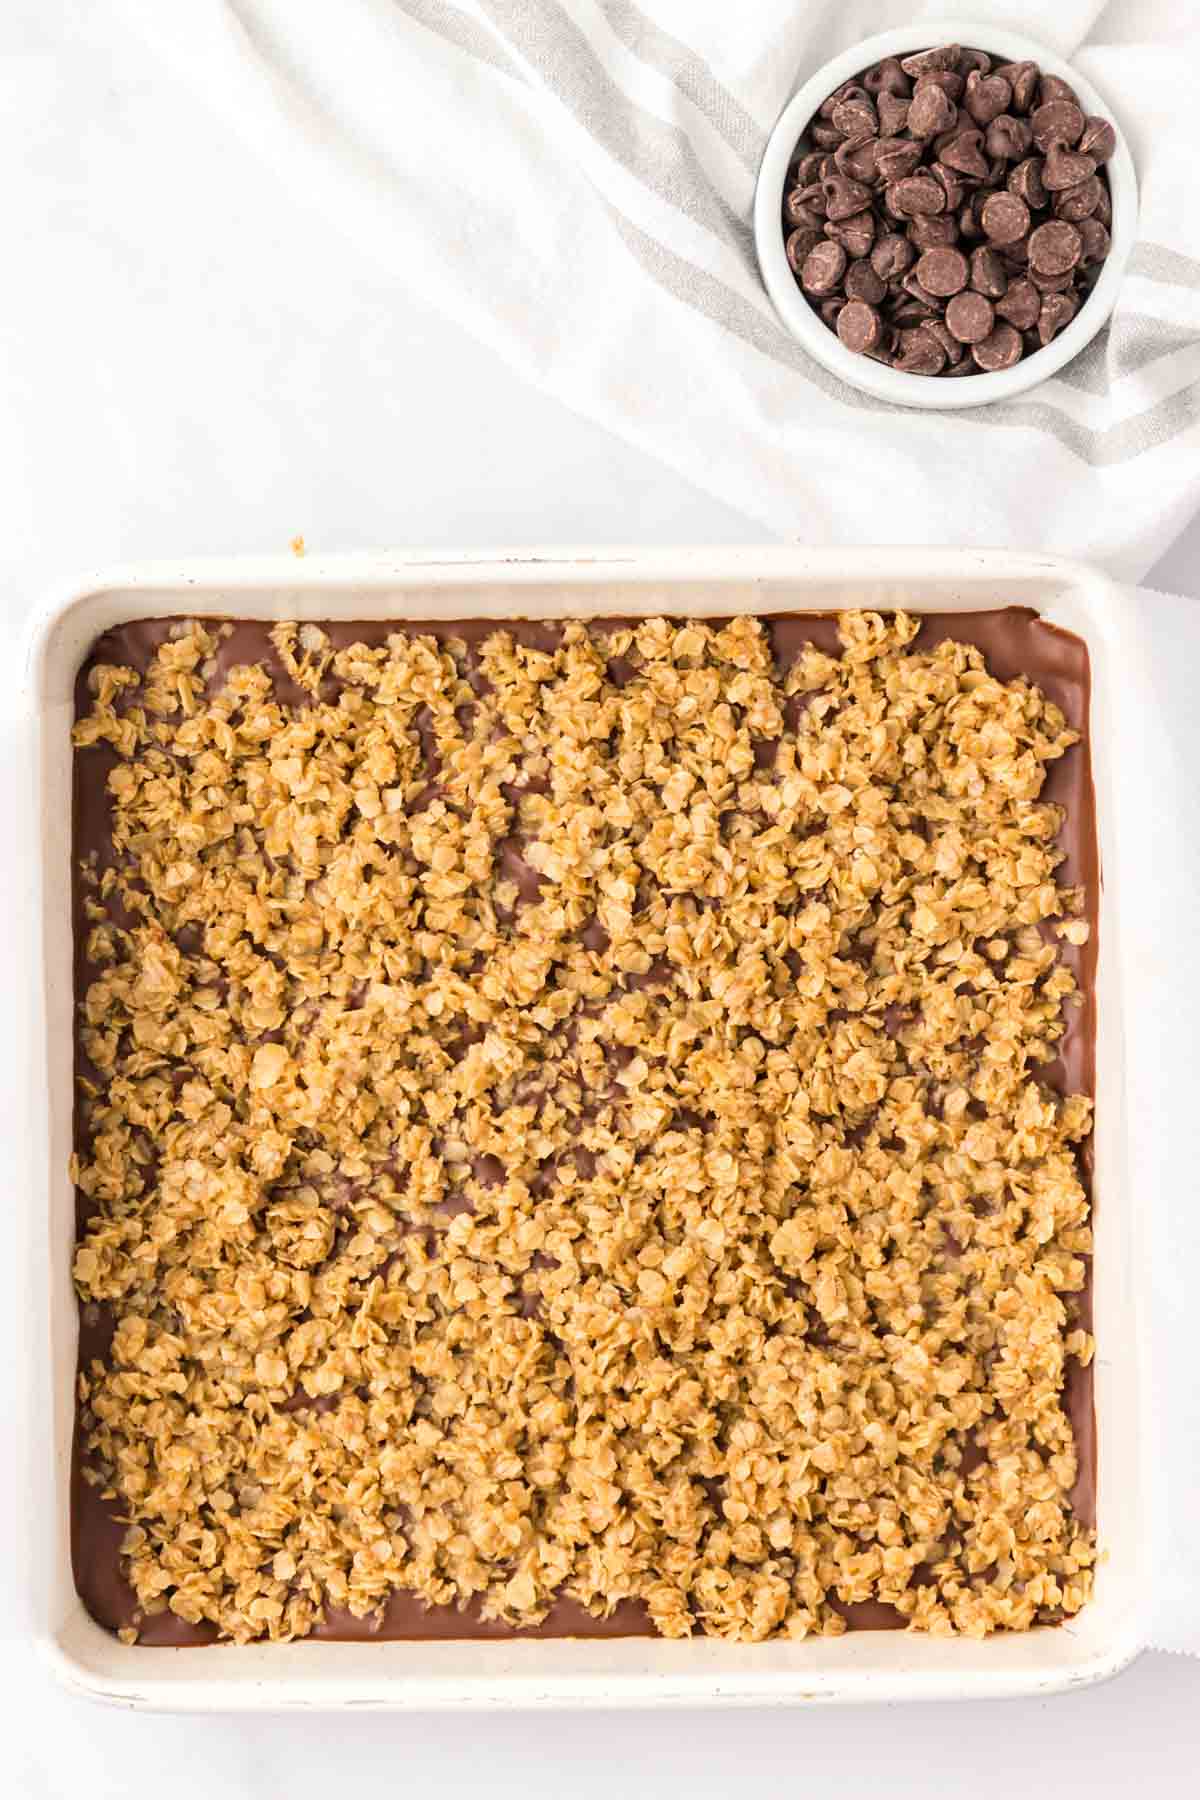 oat mixture sprinkled on top of chocolate peanut butter layer in a baking dish